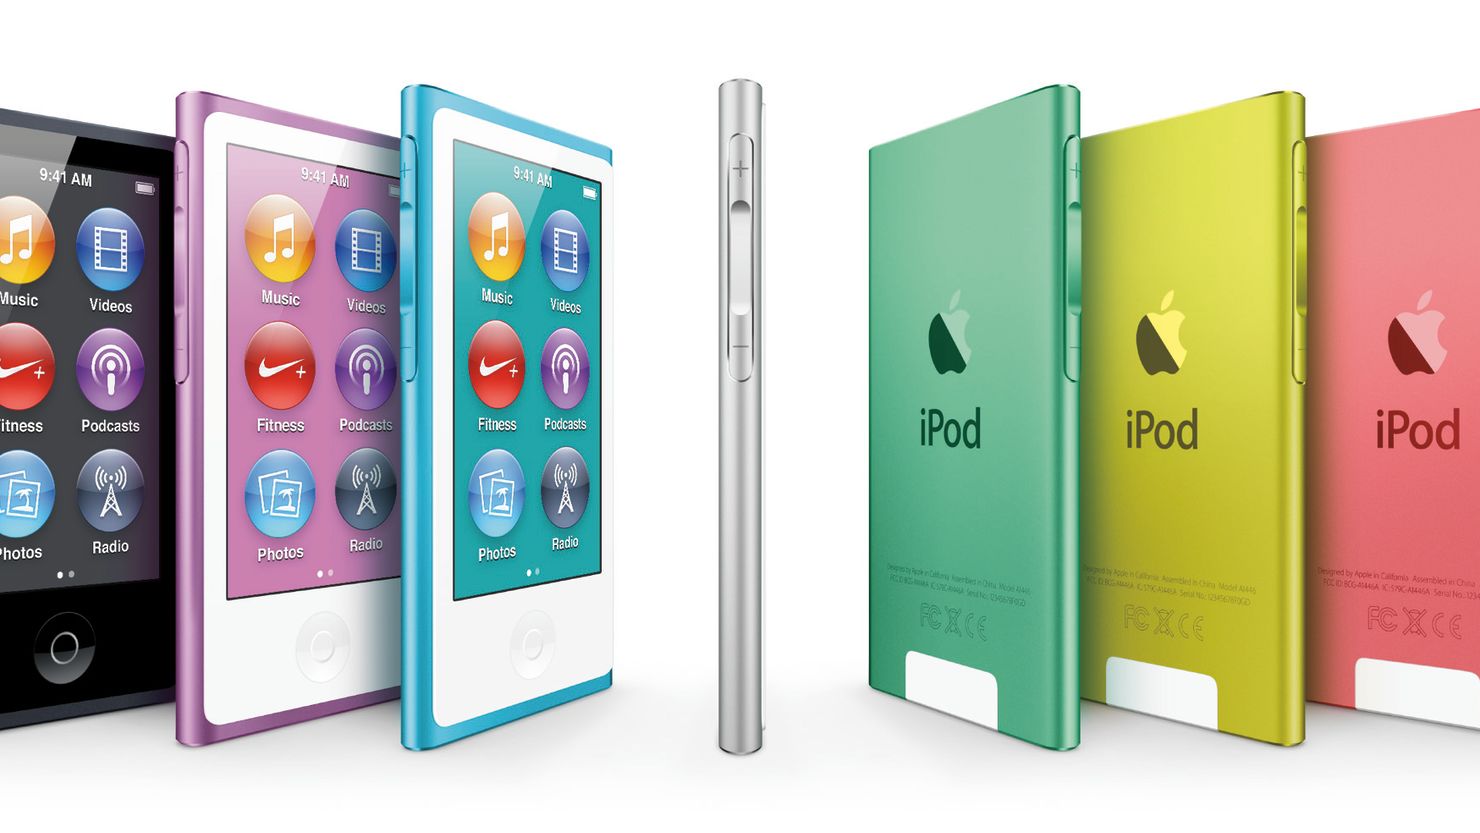 Apple revamped its line of iPod nanos Wednesday, adding a 2.5-inch multi-touch screen.